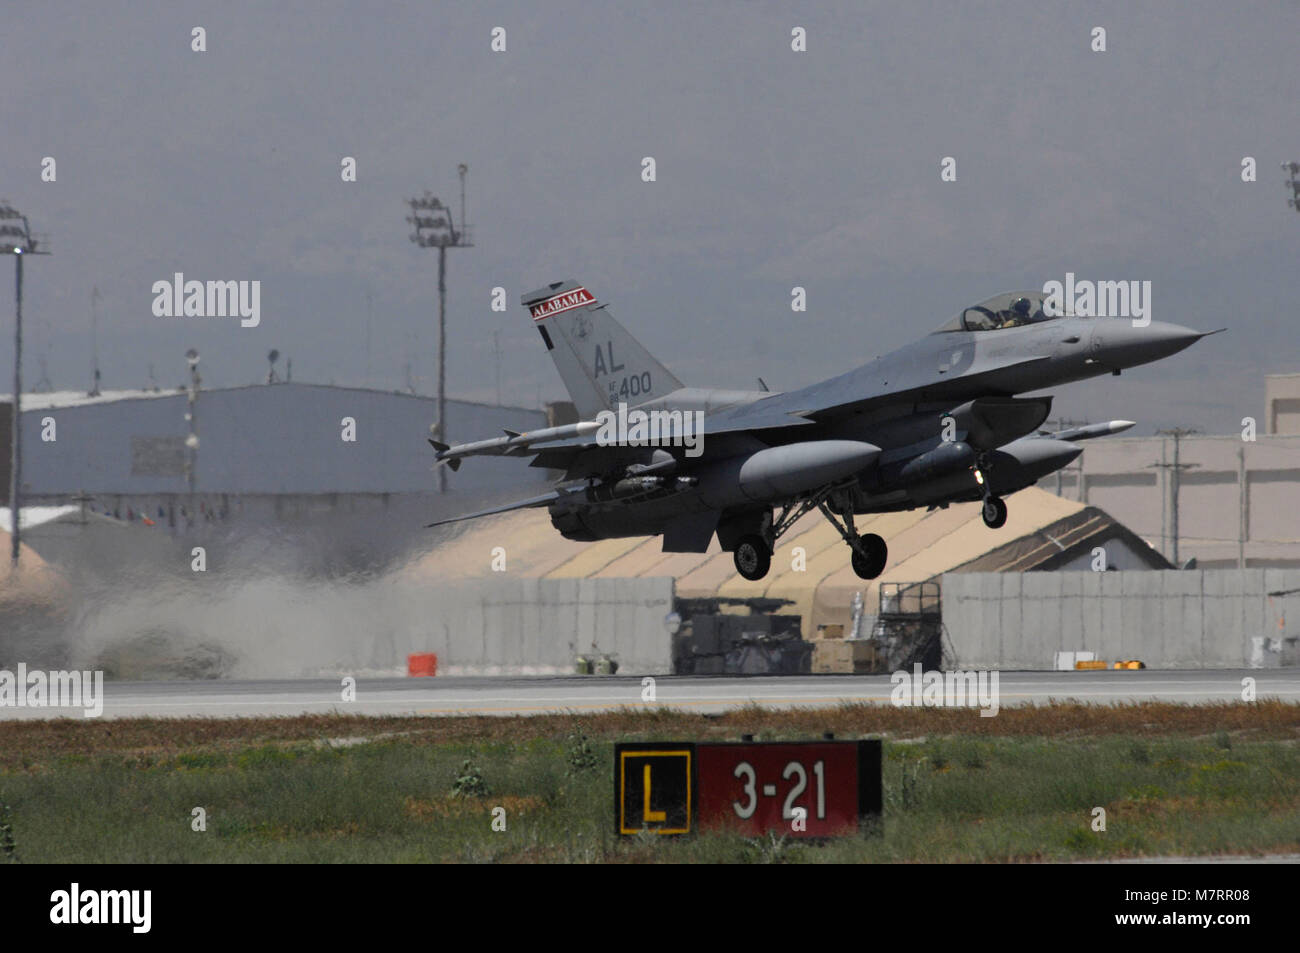 A U.S. Air Force F-16 Fighting Falcon takes off at Bagram Airfield, Afghanistan May 9, 2014.  Deployed service members help operate 46 different types of aircraft in-and-out of the buisiest single runway airfield in the Department of Defense. (U.S. Air Force photo by Master Sgt. Cohen A. Young/Released) 455th Air Expeditionary Wing Bagram Airfield, Afghanistan Stock Photo